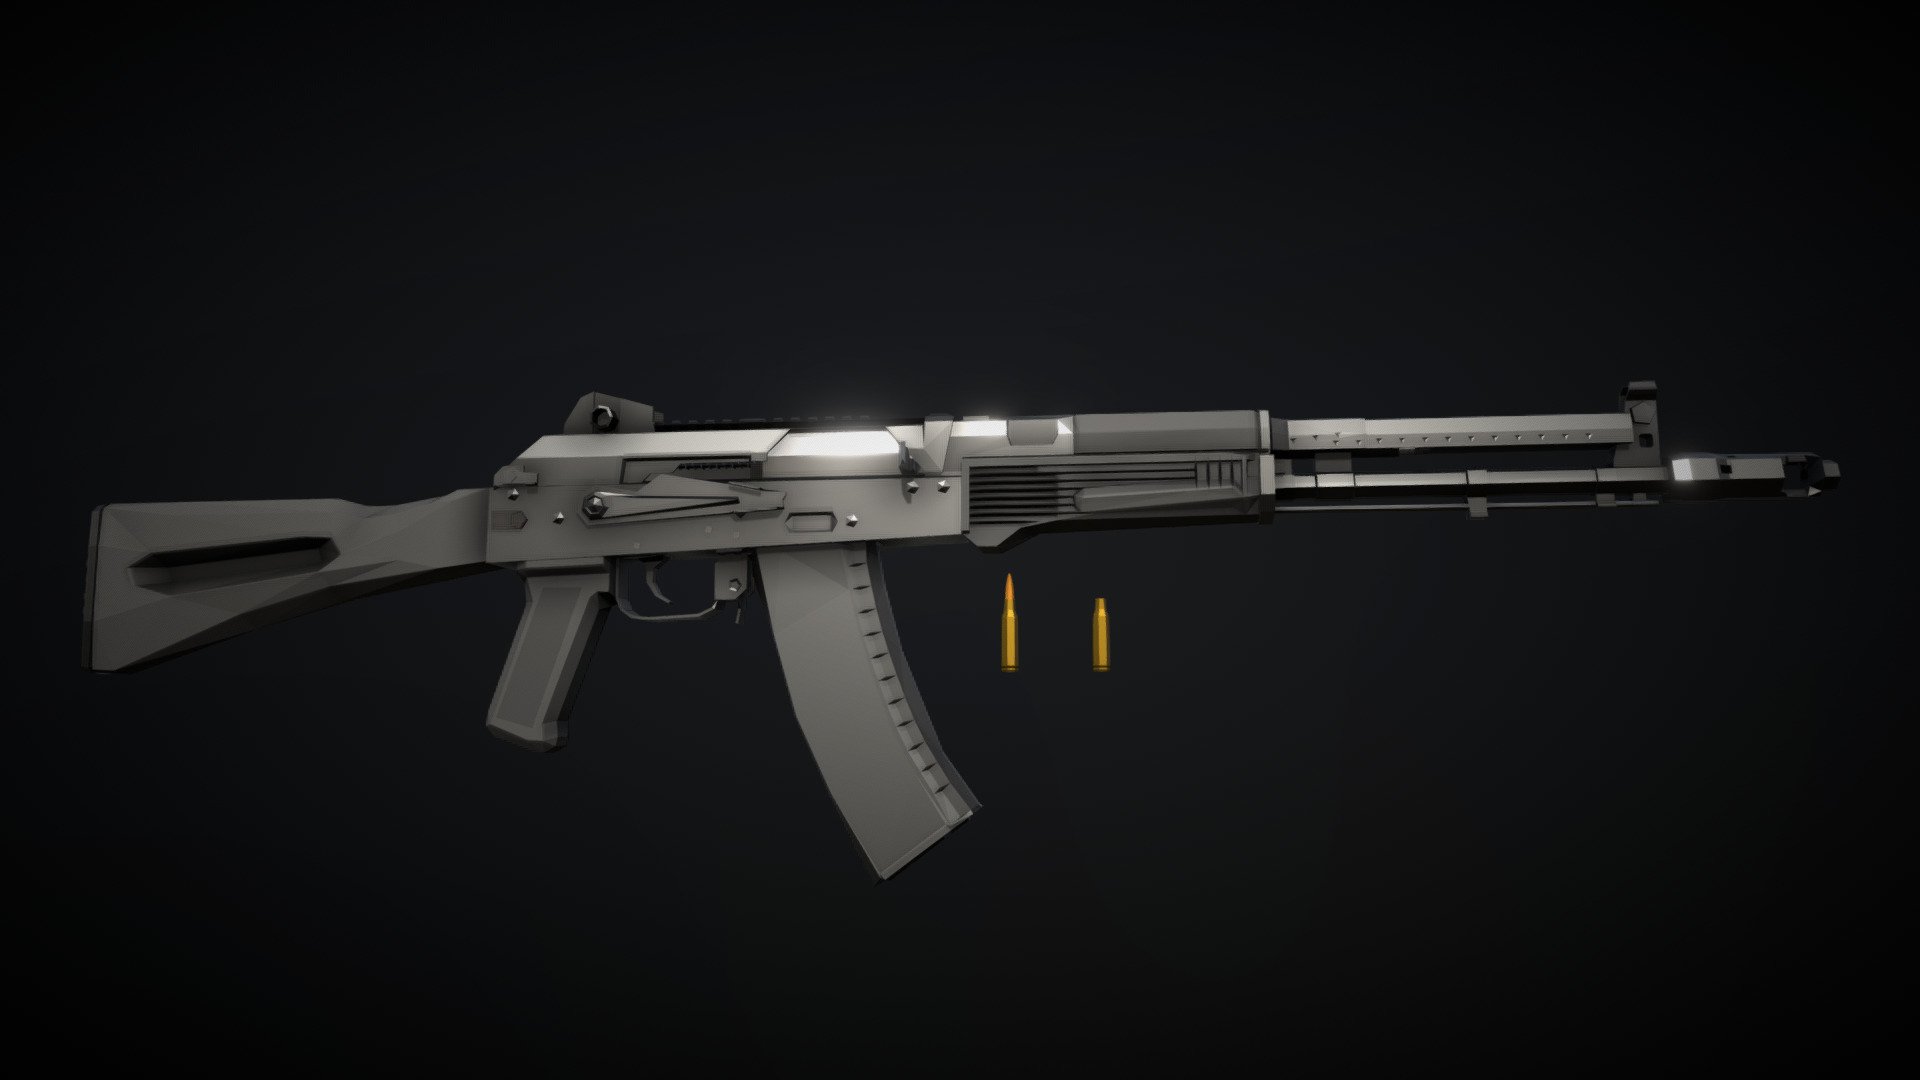 Low-Poly model of an AK-107, a 5.45 caliber rifle with a balanced recoil system, in which two gas pistons traveling in different directions are mechanically linked, cancelling out eachother's recoil force and reducing recoil significantly.

if there are any details that seem wrong to you, please let me know. It has been quite hard to find good references and try to make it as accurate as possible, and I might have gotten a few small things wrong.

14/10/22:
corrected a detail on the forward gas piston shroud/forward dust cover (I don't think this part even has a name but I'm giving it one lmao) - Low-Poly AK-107 - Download Free 3D model by notcplkerry 3d model